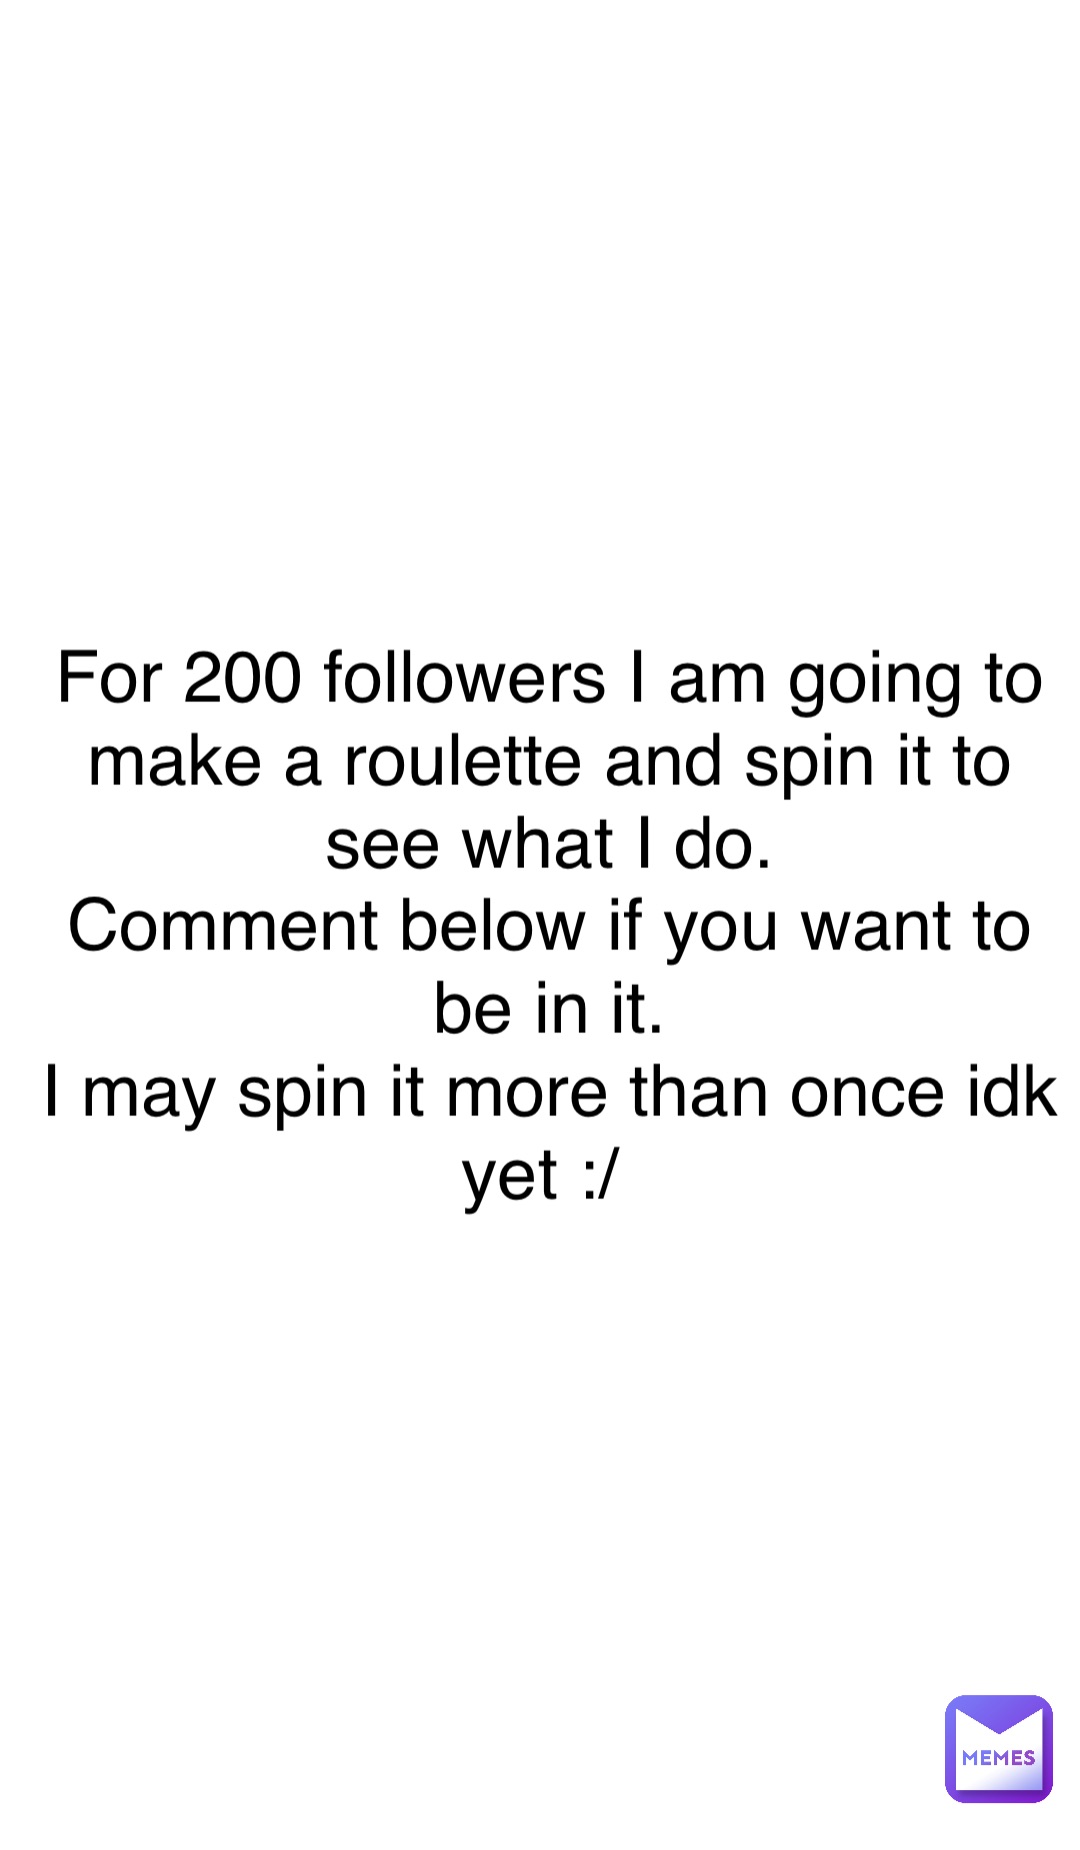 Double tap to edit For 200 followers I am going to make a roulette and spin it to see what I do. 
Comment below if you want to be in it. 
I may spin it more than once idk yet :/